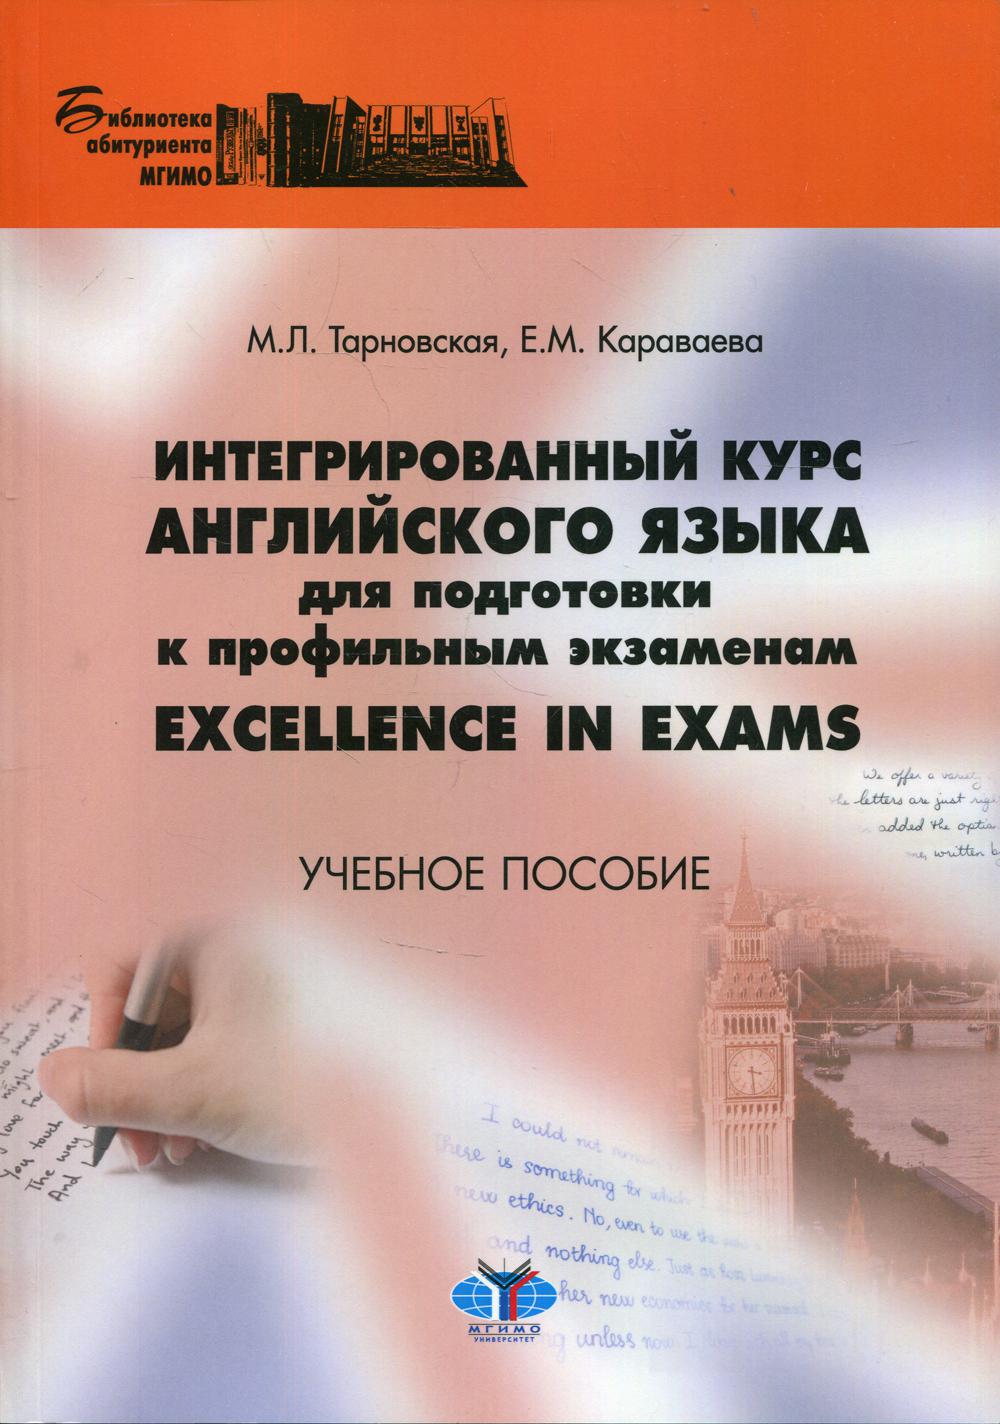          Excellence in Exams.  .